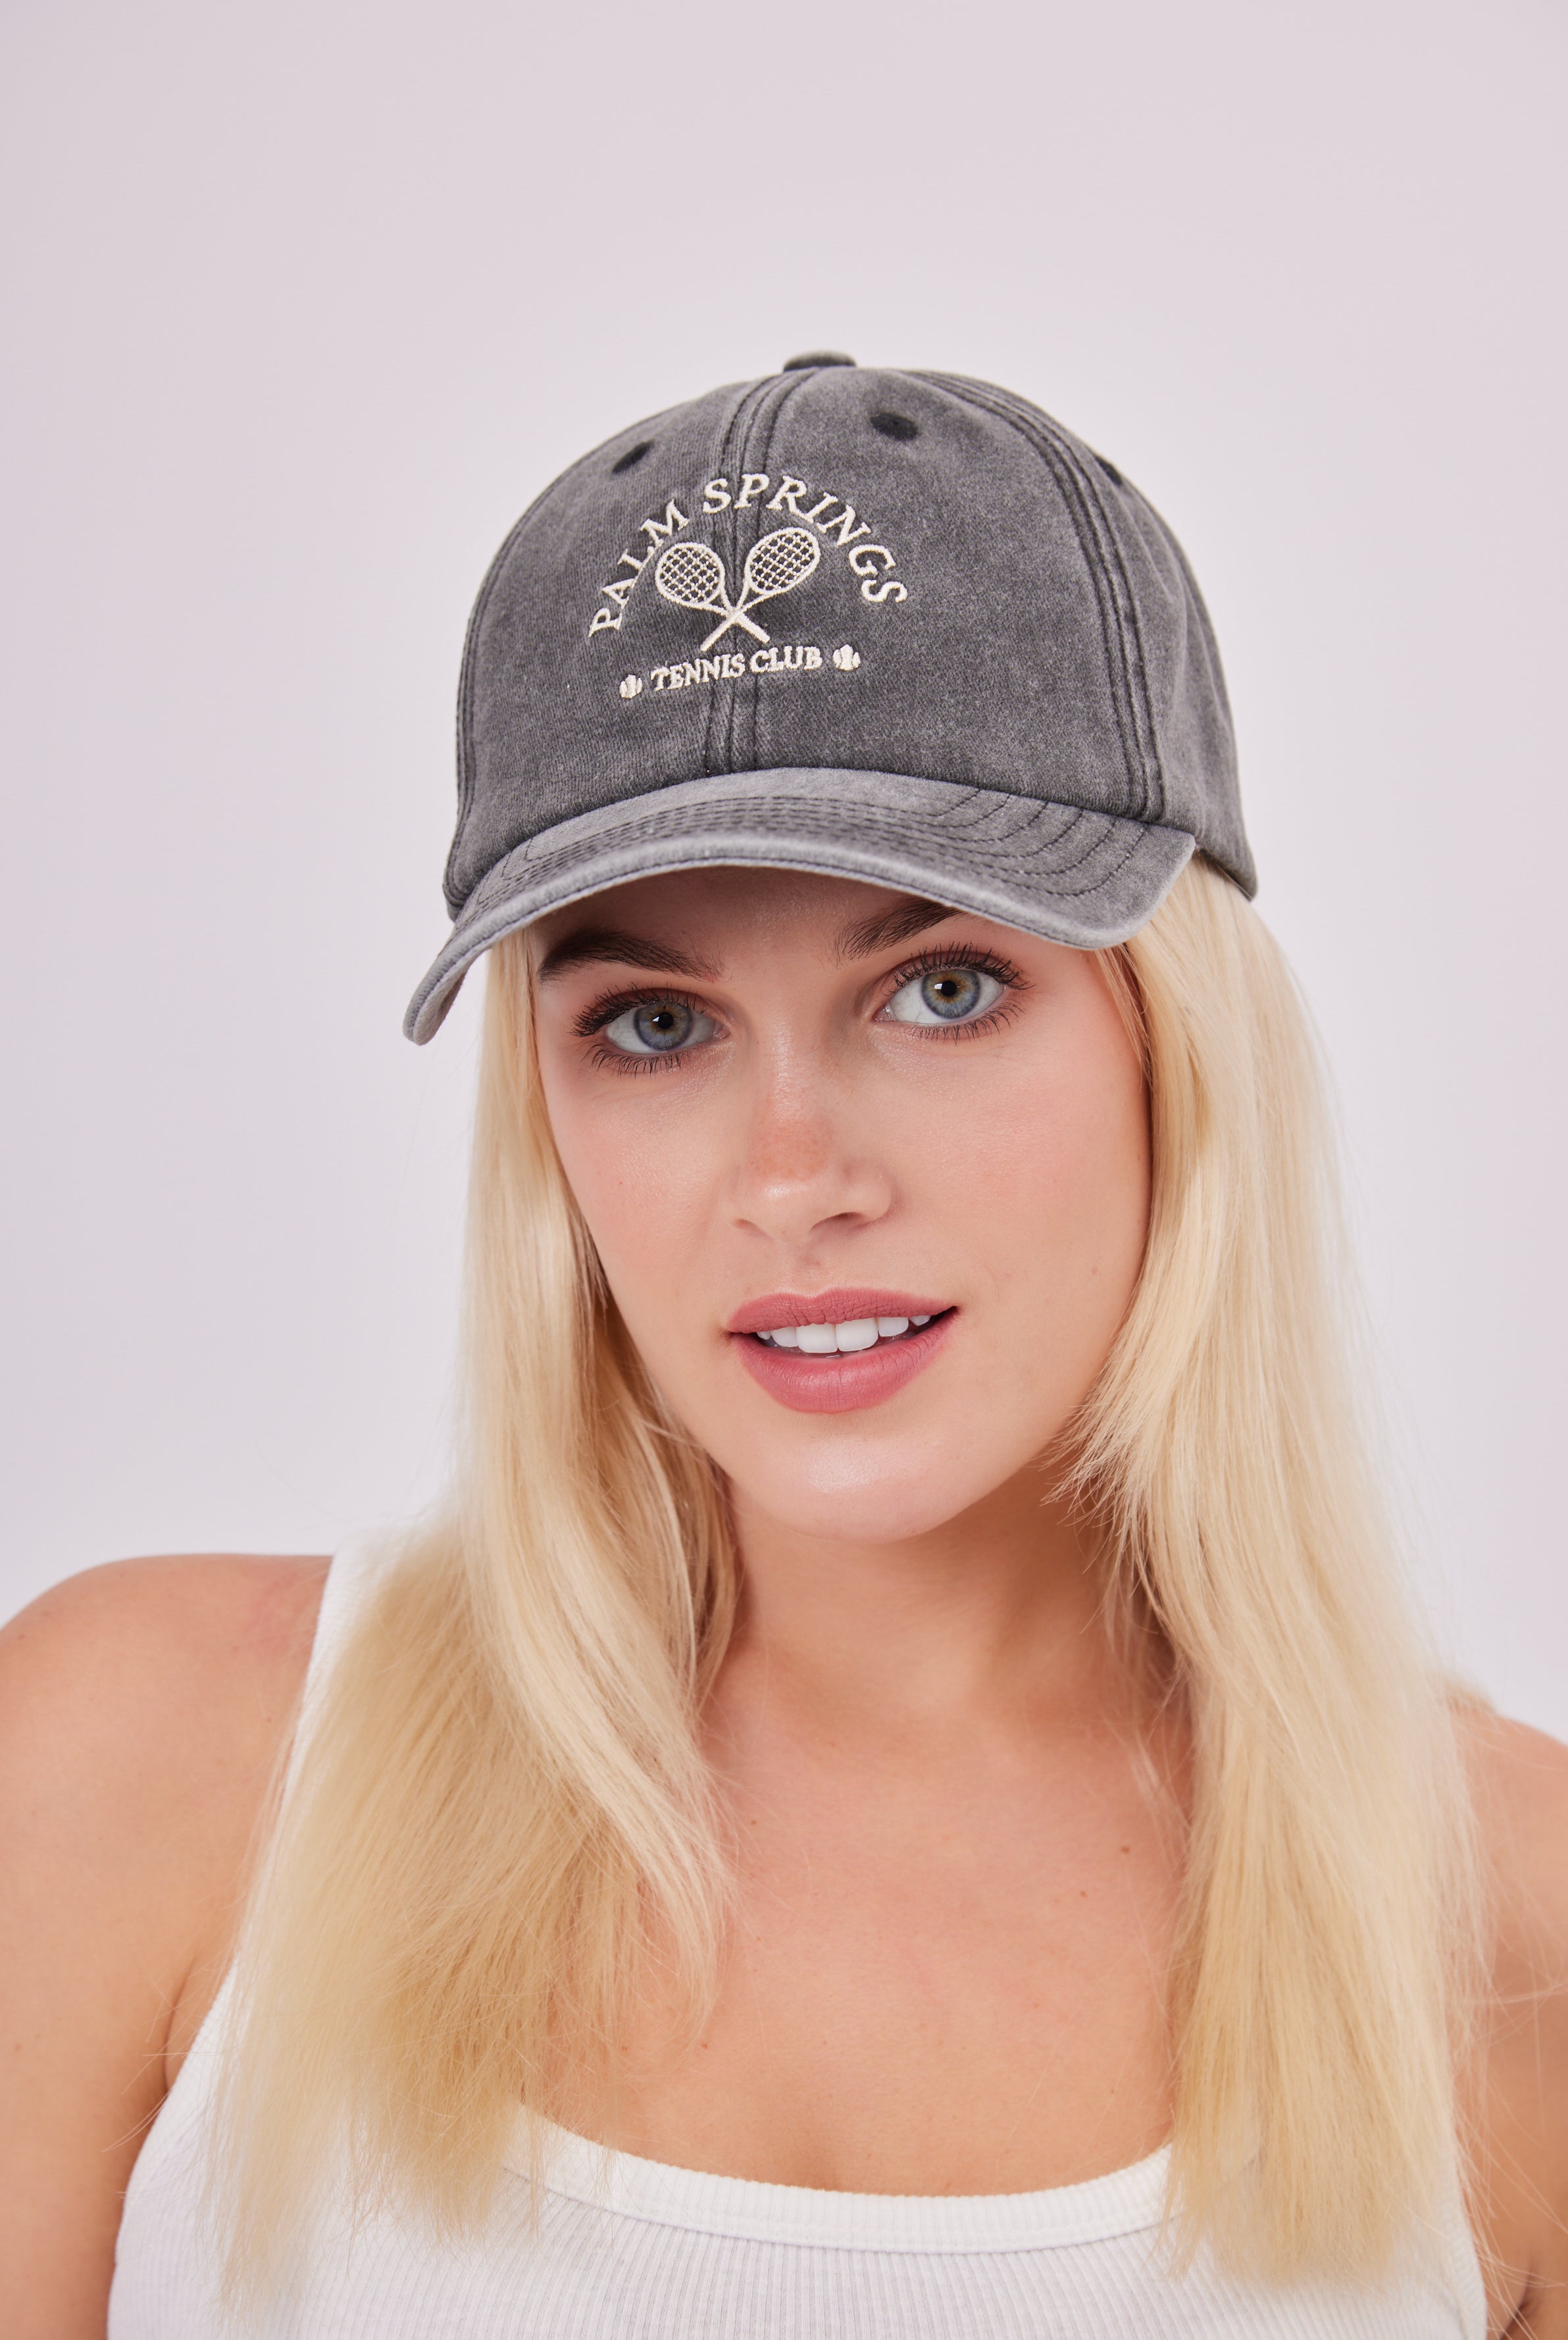 My Accessories London Palm Springs Baseball Cap in Washed Black | athleisure | activewear | gym hat | gym cap | sporty accessories | sporty cap | sporty hat | summer accessories | summer hat | summer hats | summer cap | spring accessories | spring hat | embroidered hat | embroidered cap | baseball cap | distressed cap | retro cap | women's cap 